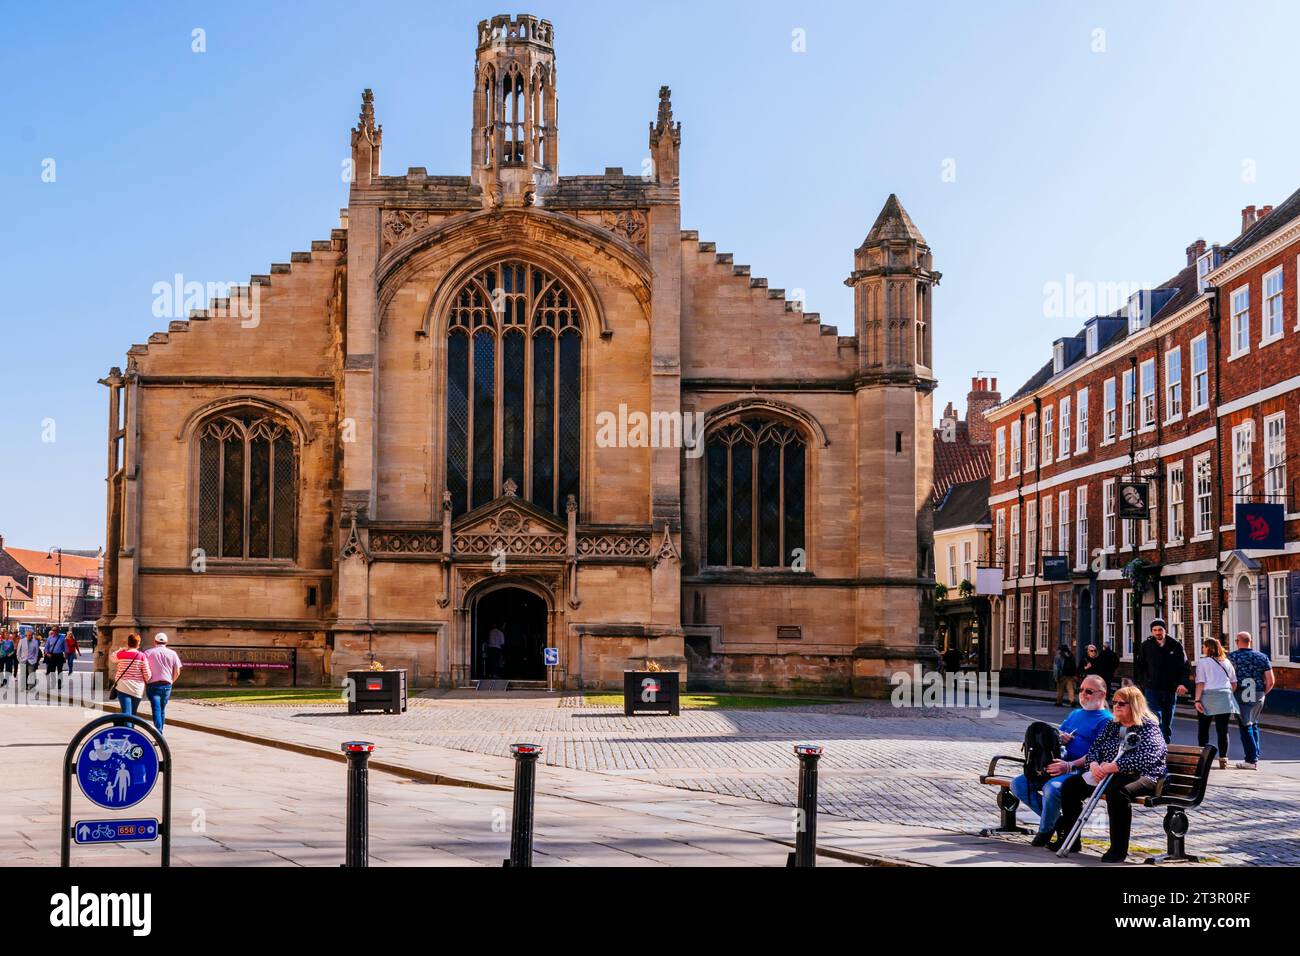 St Michael le Belfrey is an Anglican church in York, situated at the junction of High Petergate and Minster Yard. York, North Yorkshire, Yorkshire and Stock Photo